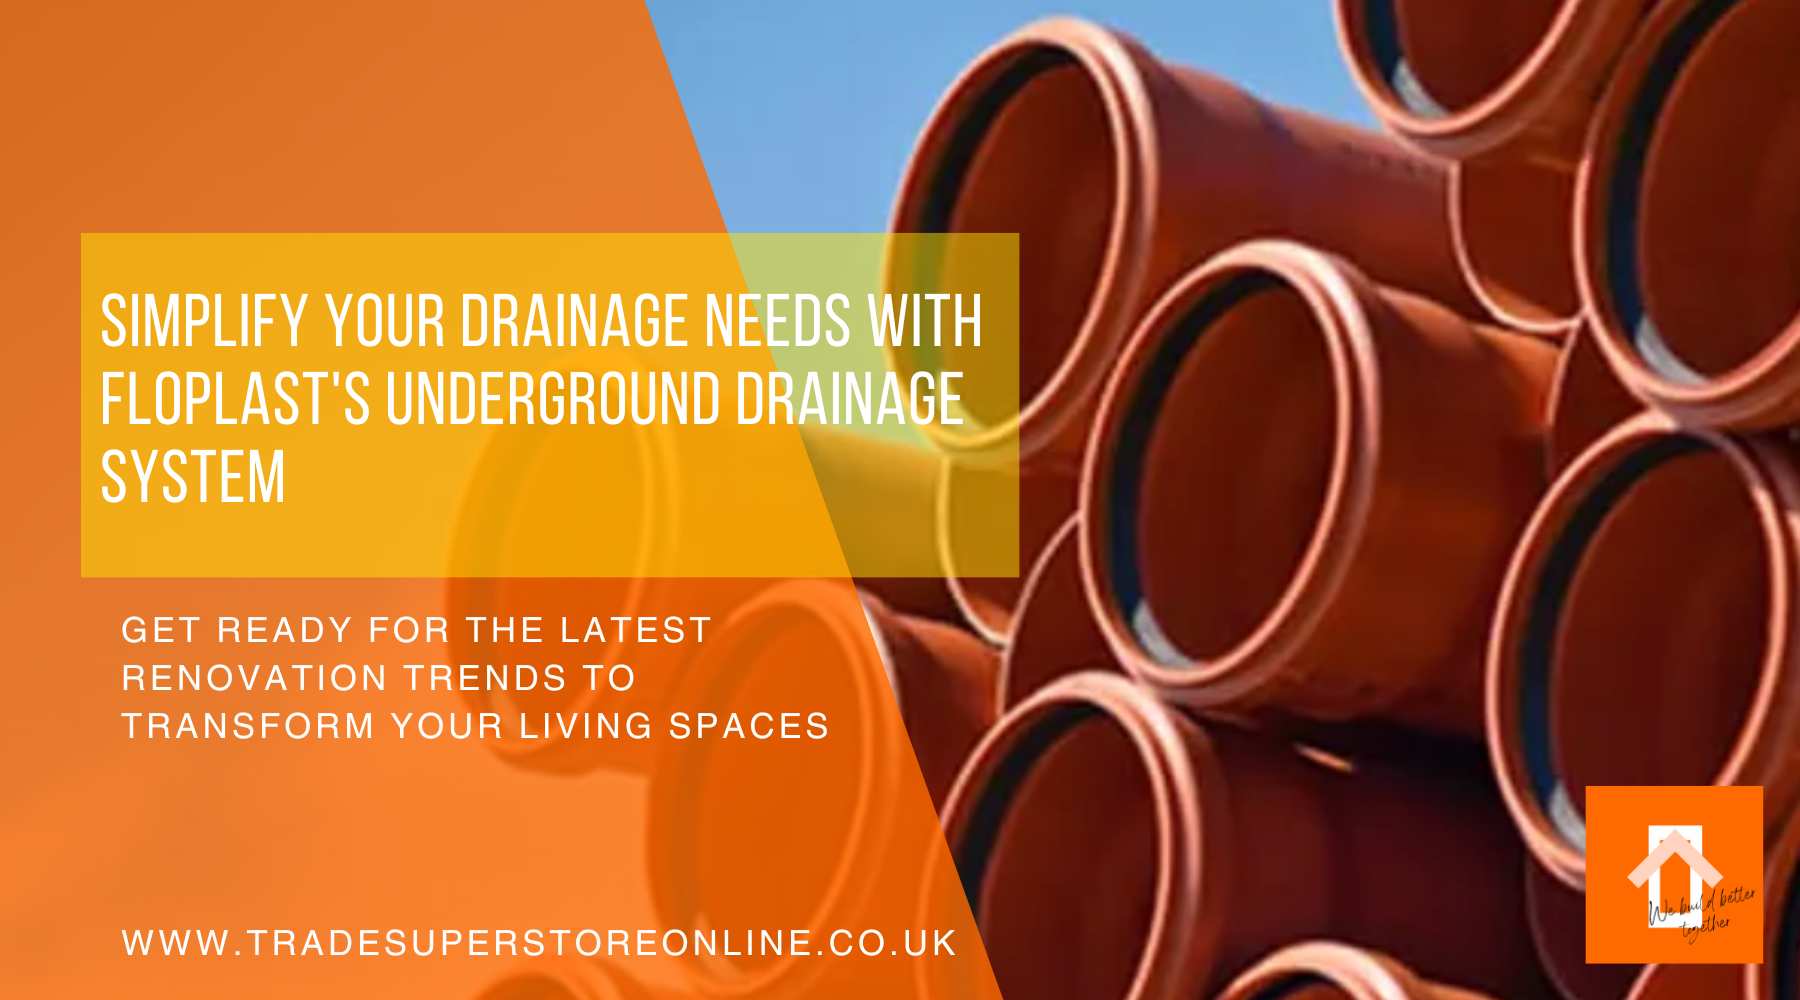 Simplify Your Drainage Needs with FloPlast's Underground Drainage System